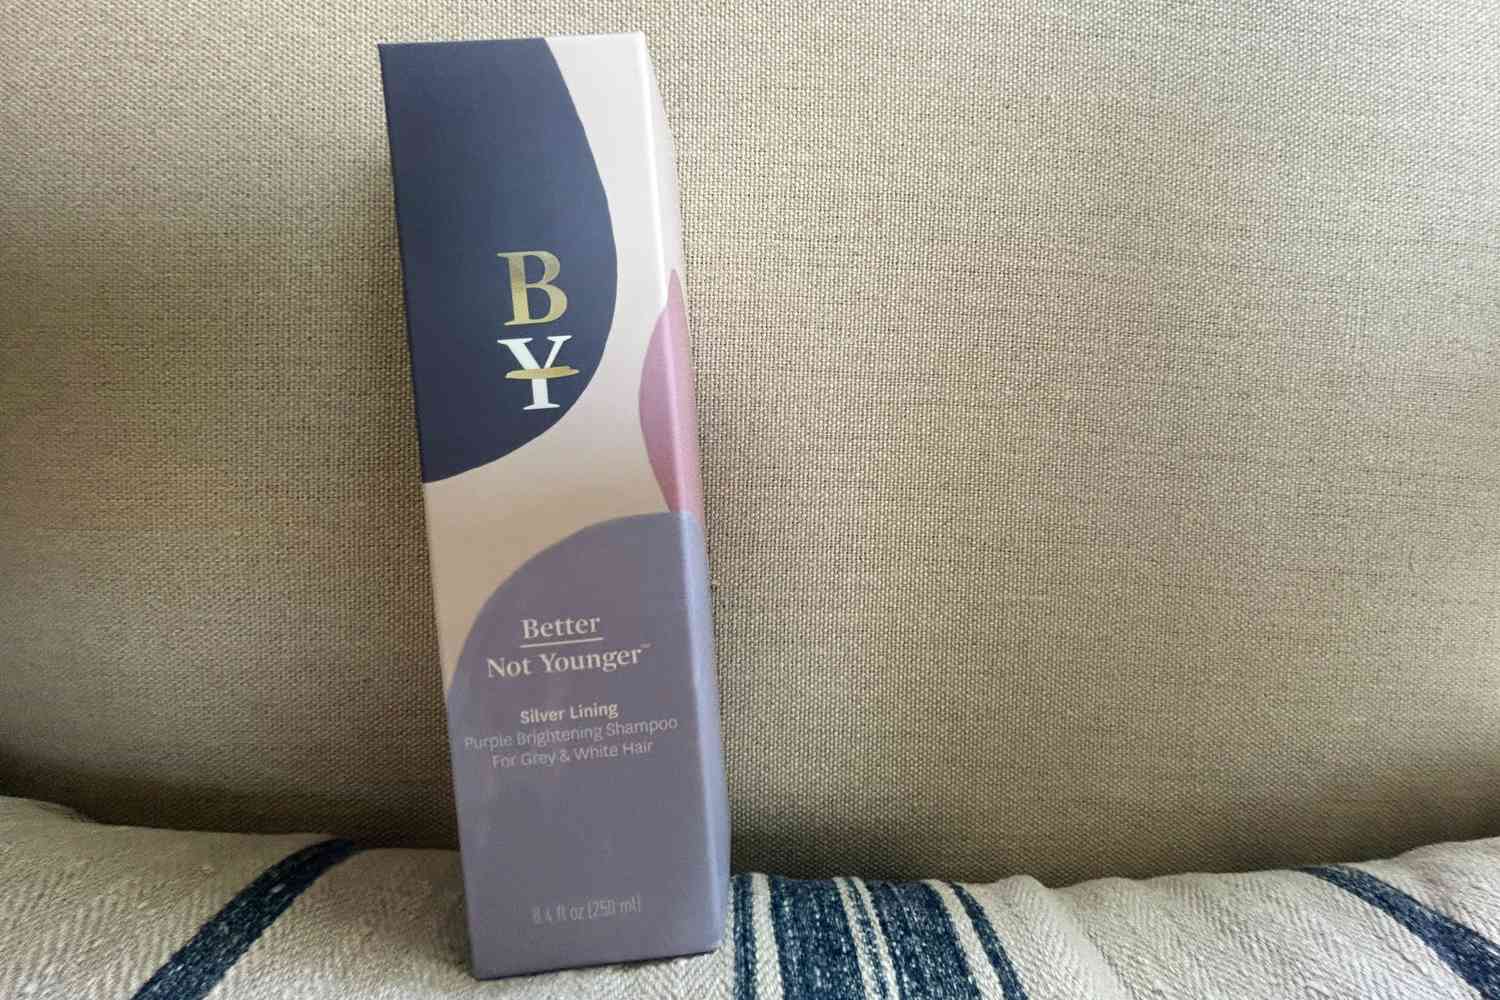 A box of Better Not Younger Silver Lining Purple Brightening Shampoo for Grey & White Hair